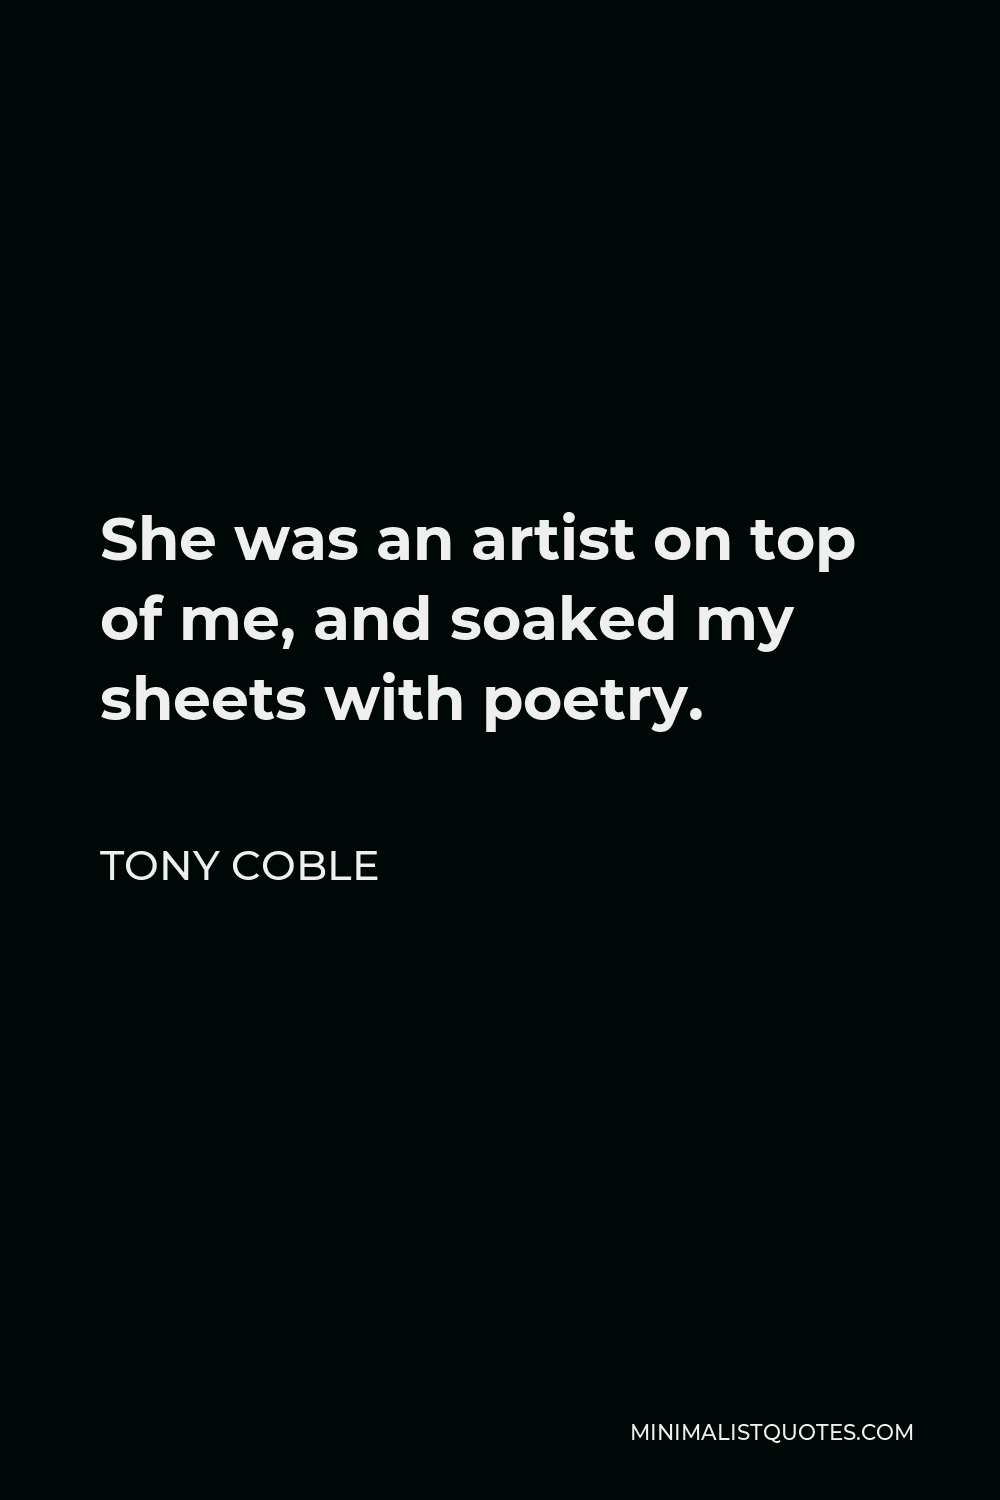 Tony Coble Quote - She was an artist on top of me, and soaked my sheets with poetry.